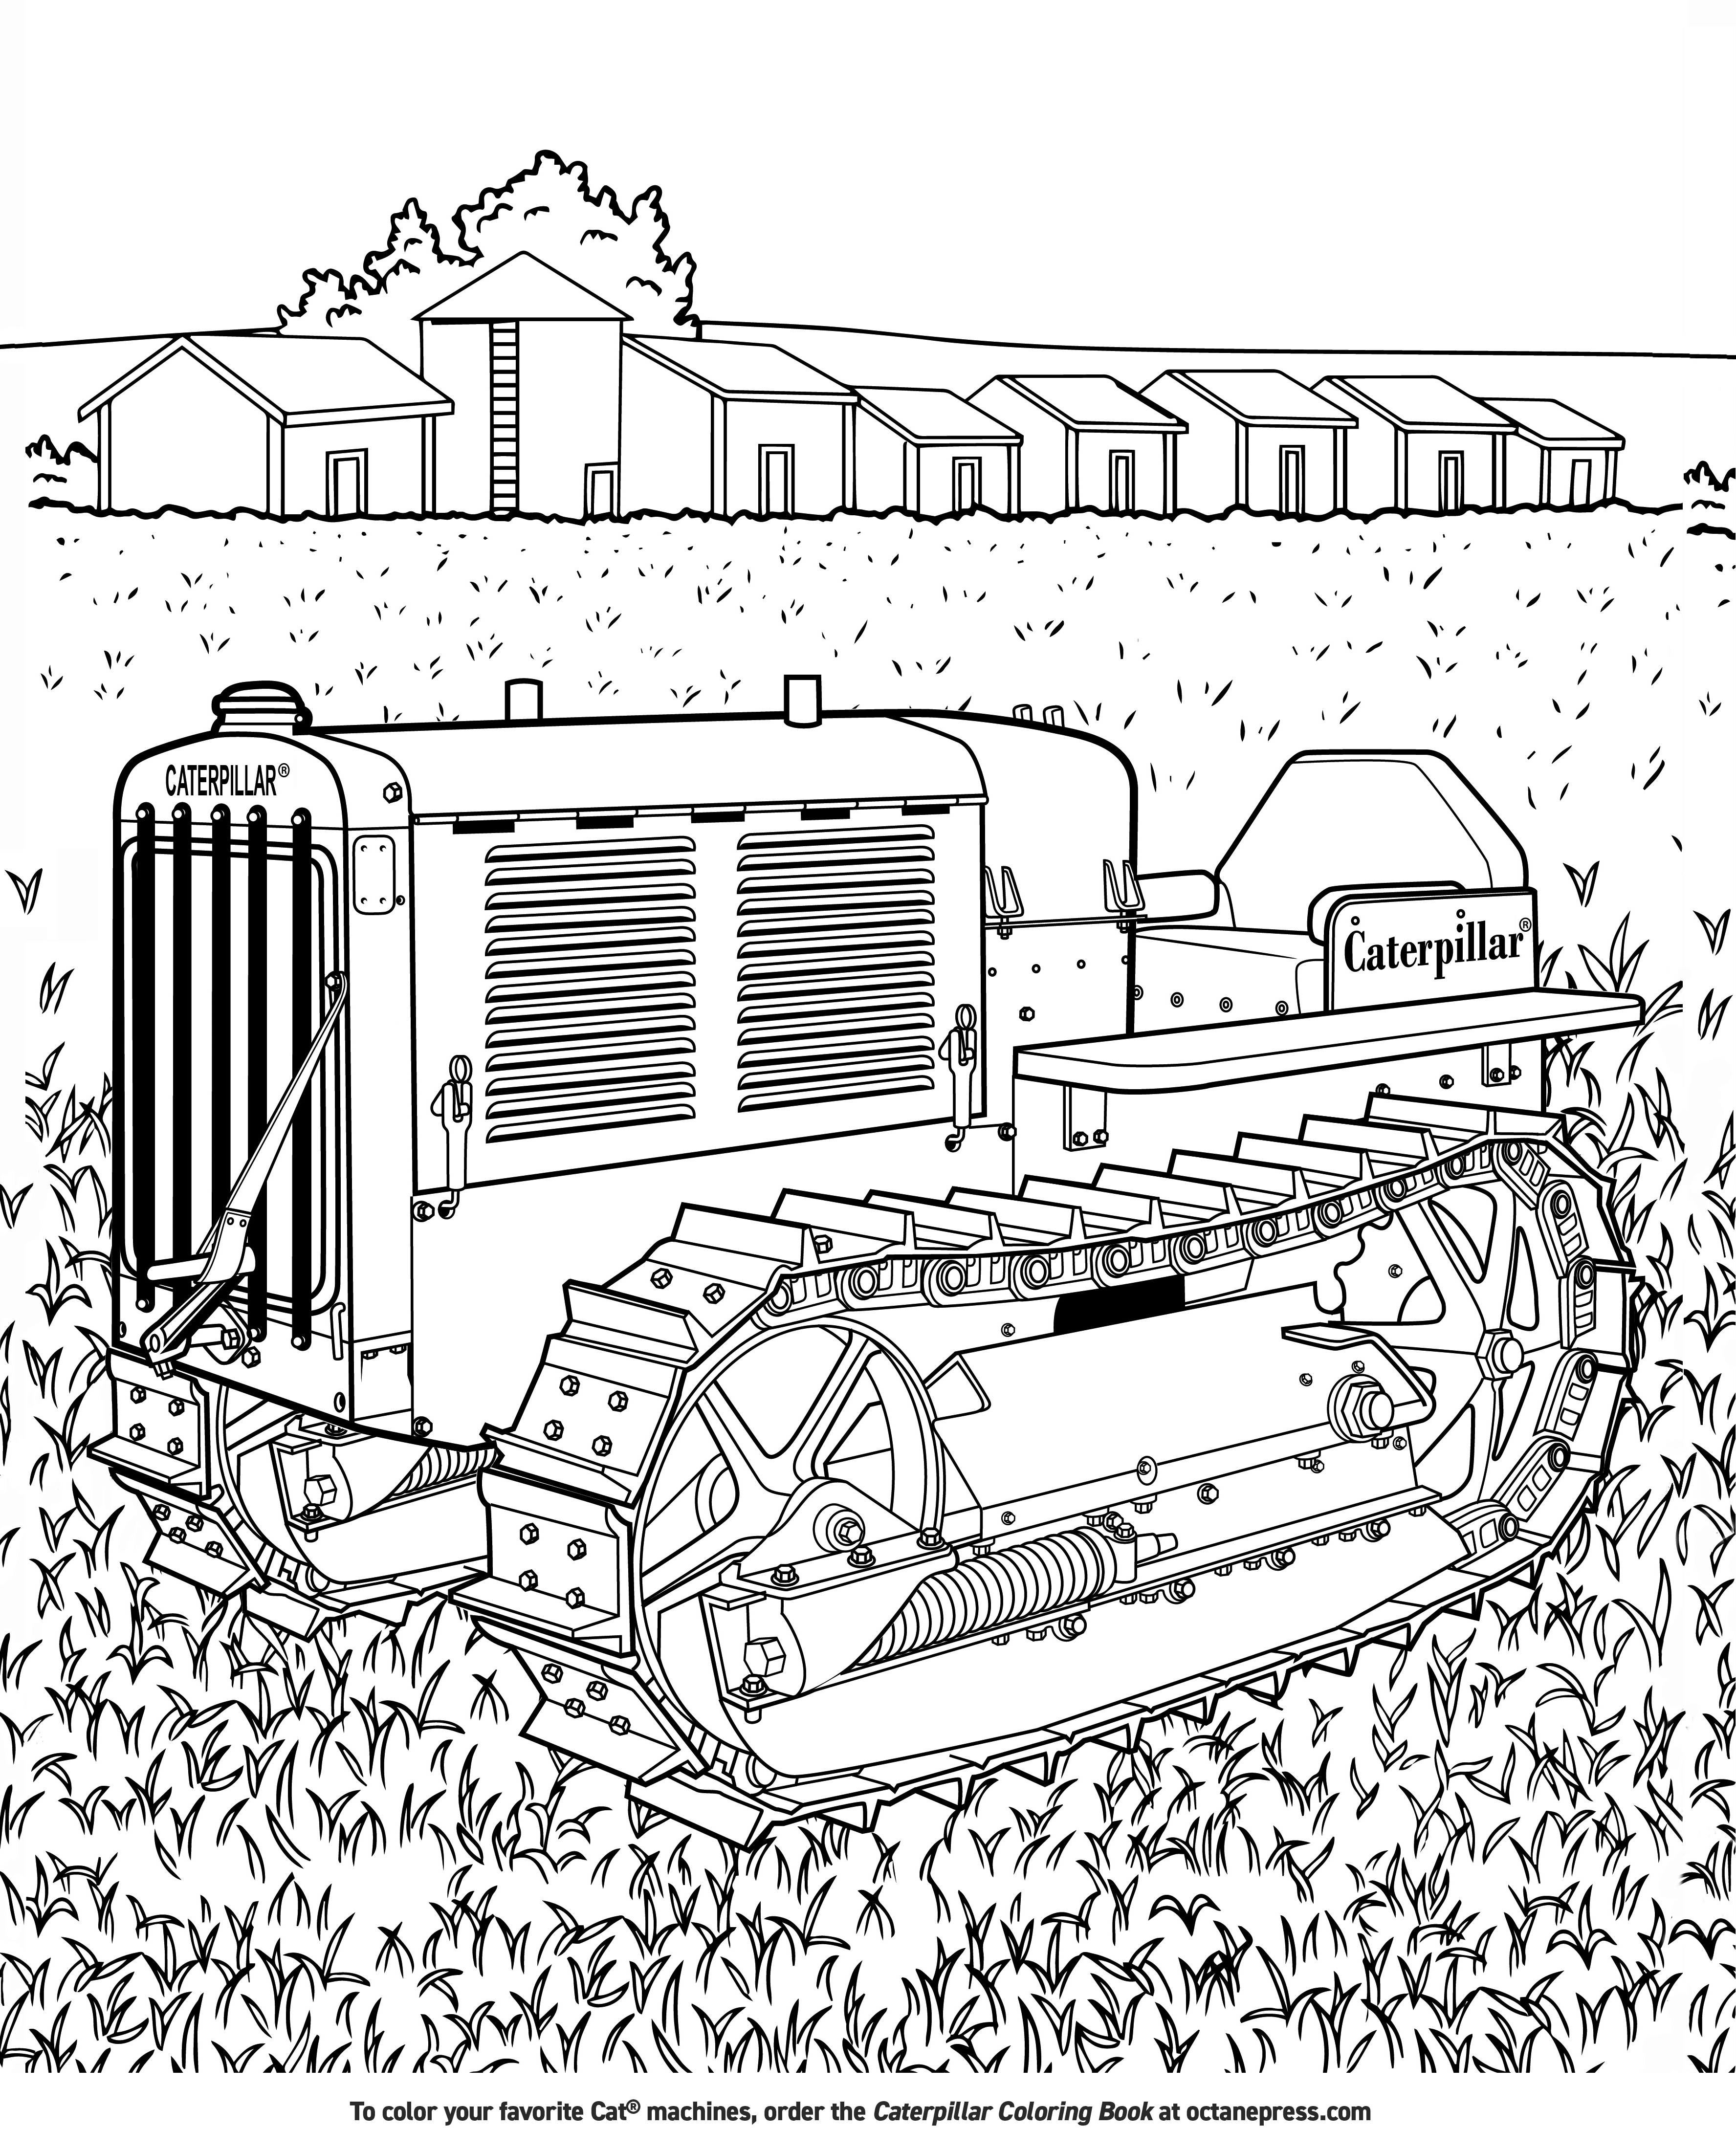 Cat® Equipment Coloring Pages, Cat